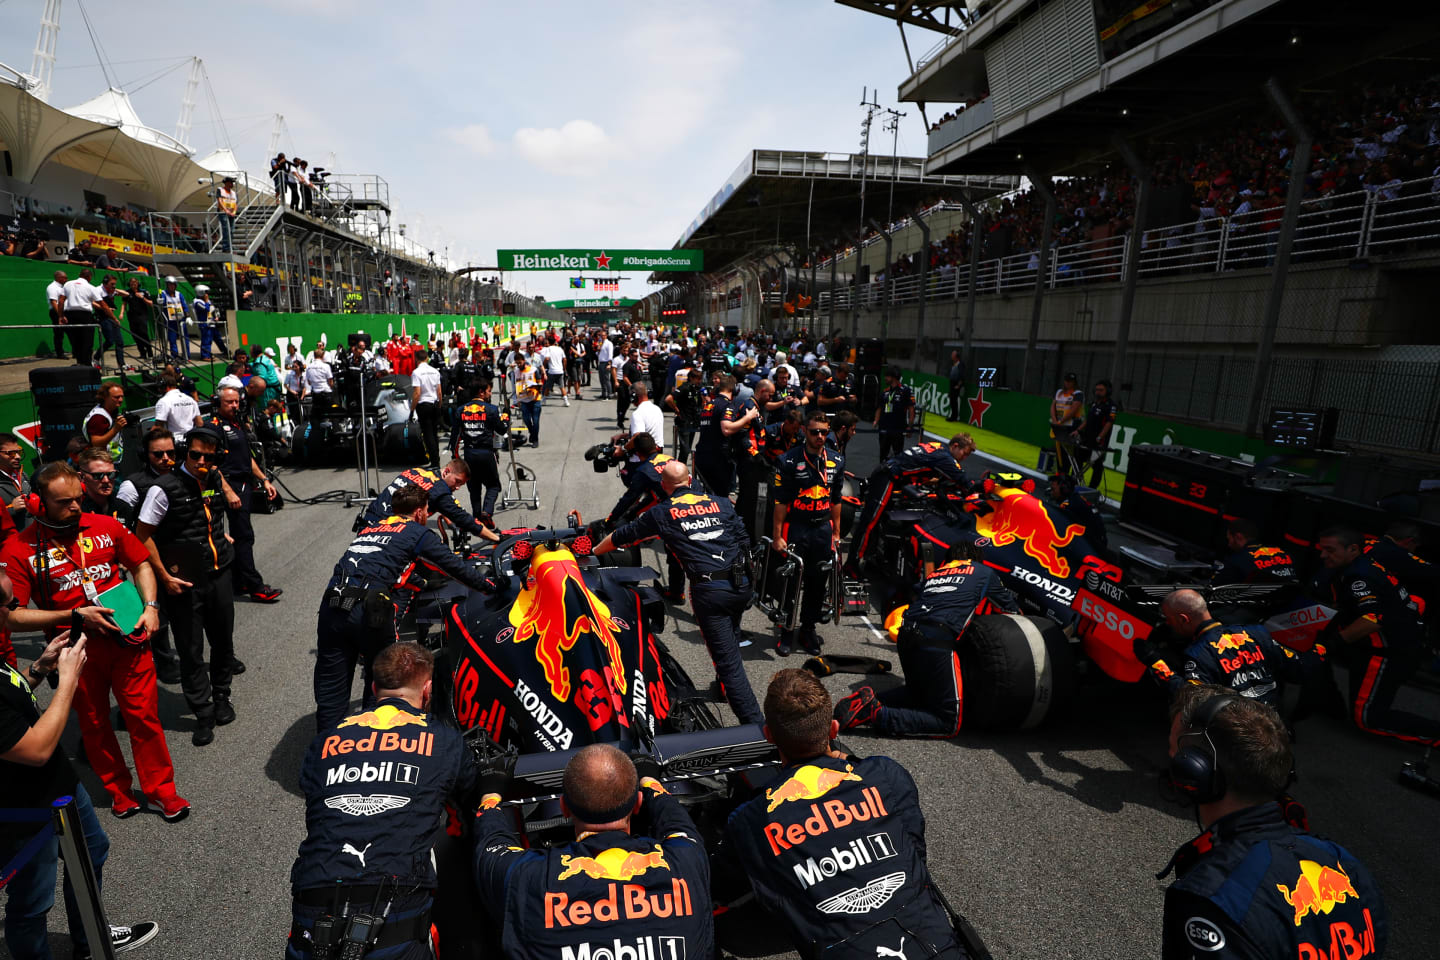 SAO PAULO, BRAZIL - NOVEMBER 17: The Red Bull Racing team prepare for the race on the grid before